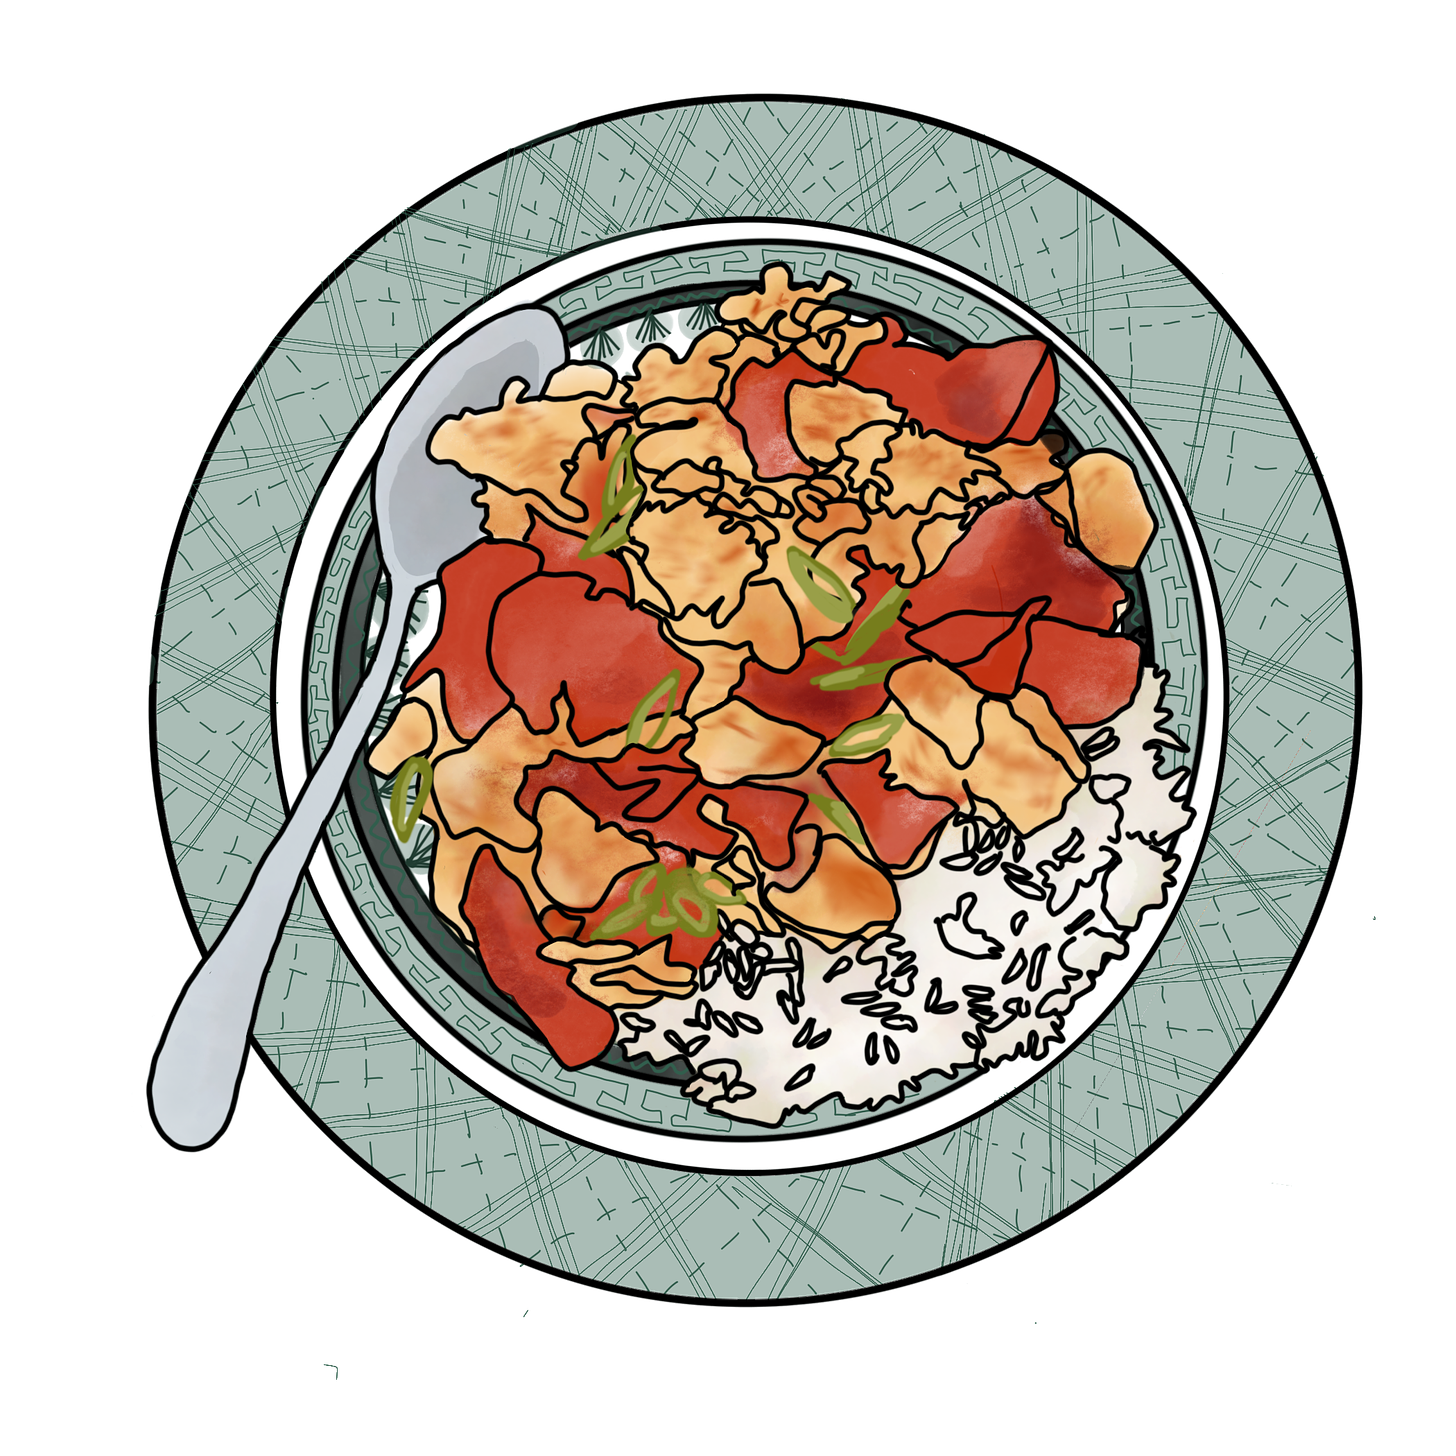 Illustration of a tomato and egg stir fry served with rice on a vintage ceramic plate.